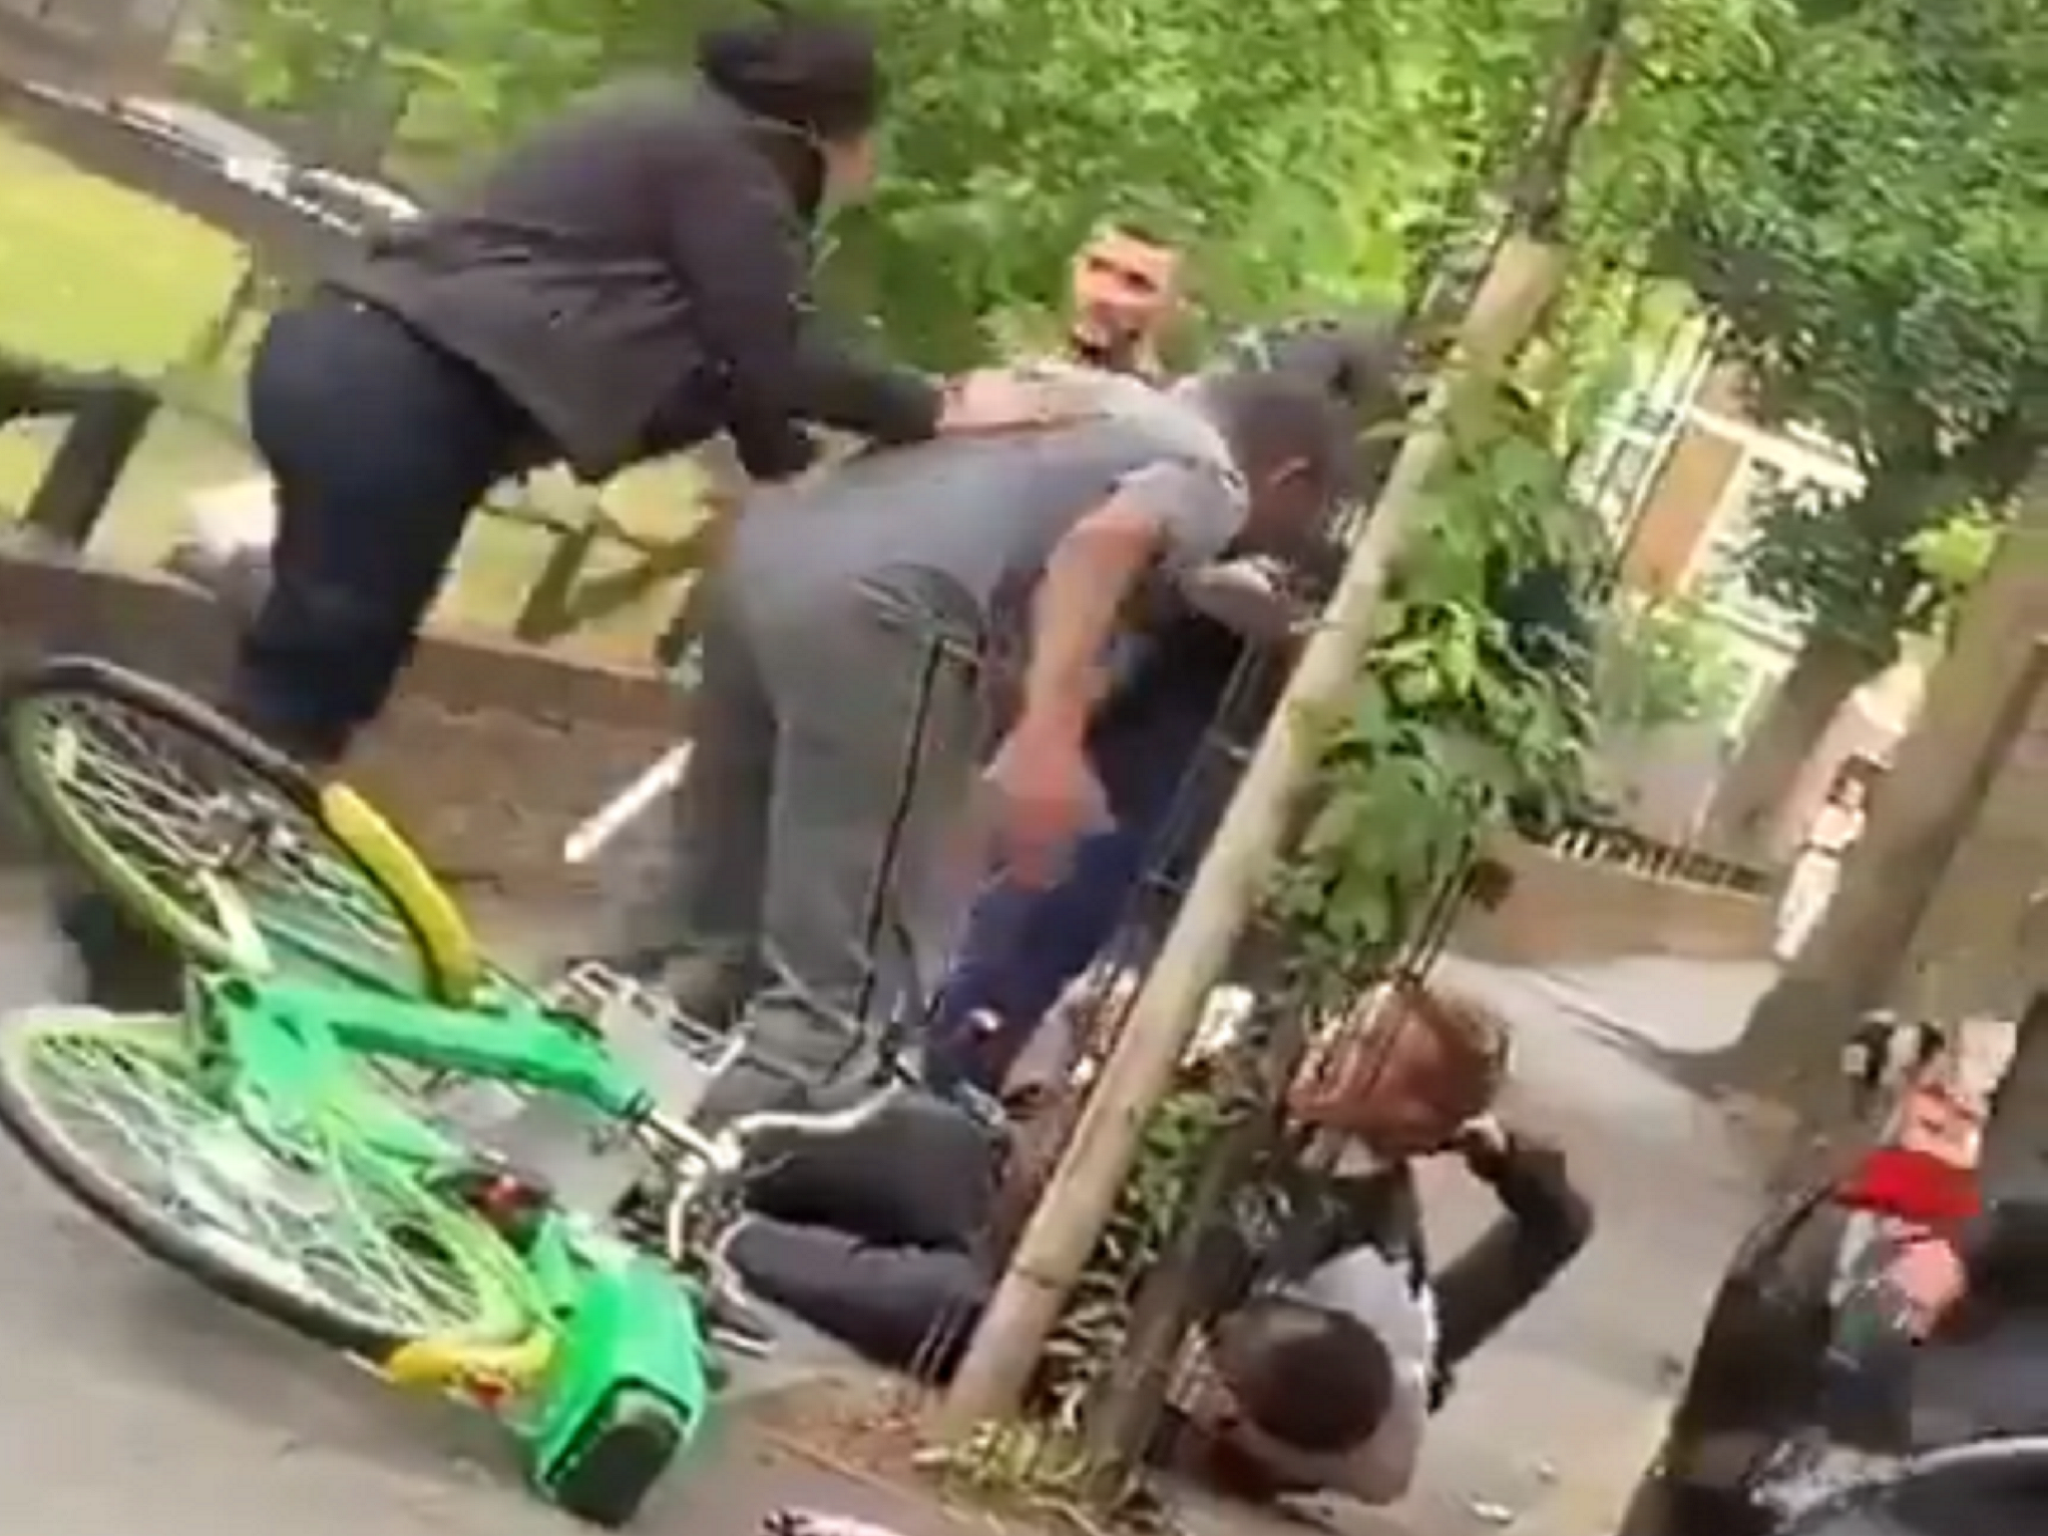 Still image taken from video footage showing an assault on two police officers in Hackney, London, 10 June 2020.